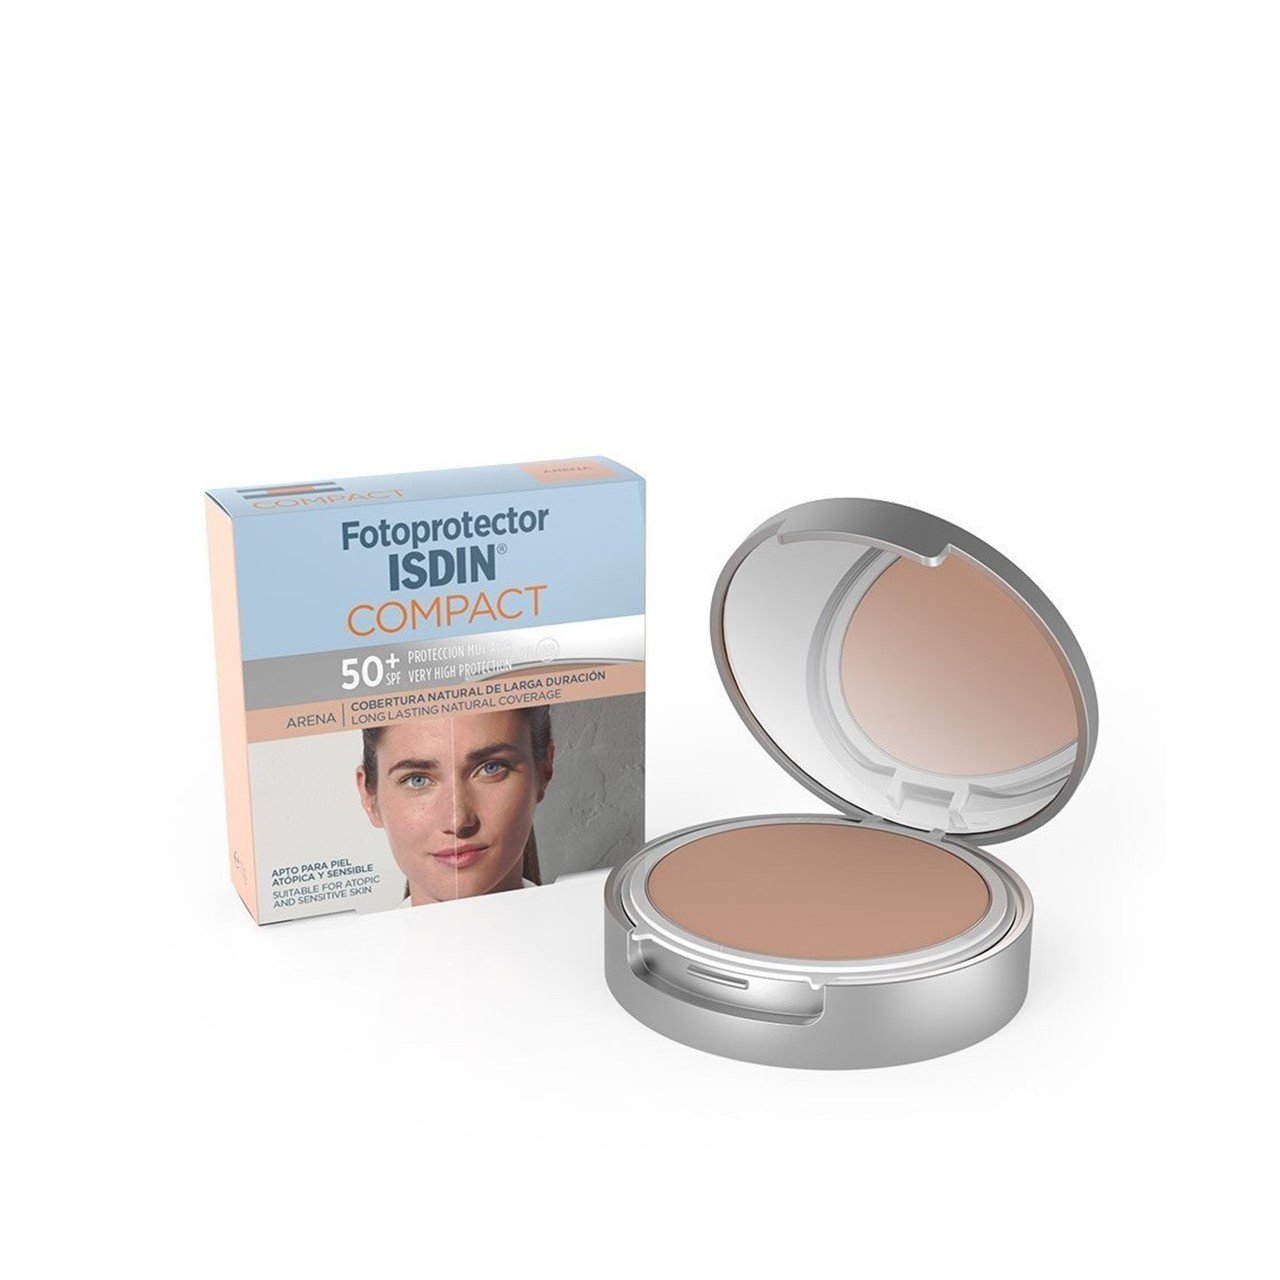 ISDIN Fotoprotector Compact SPF50+ Color Sand 10g